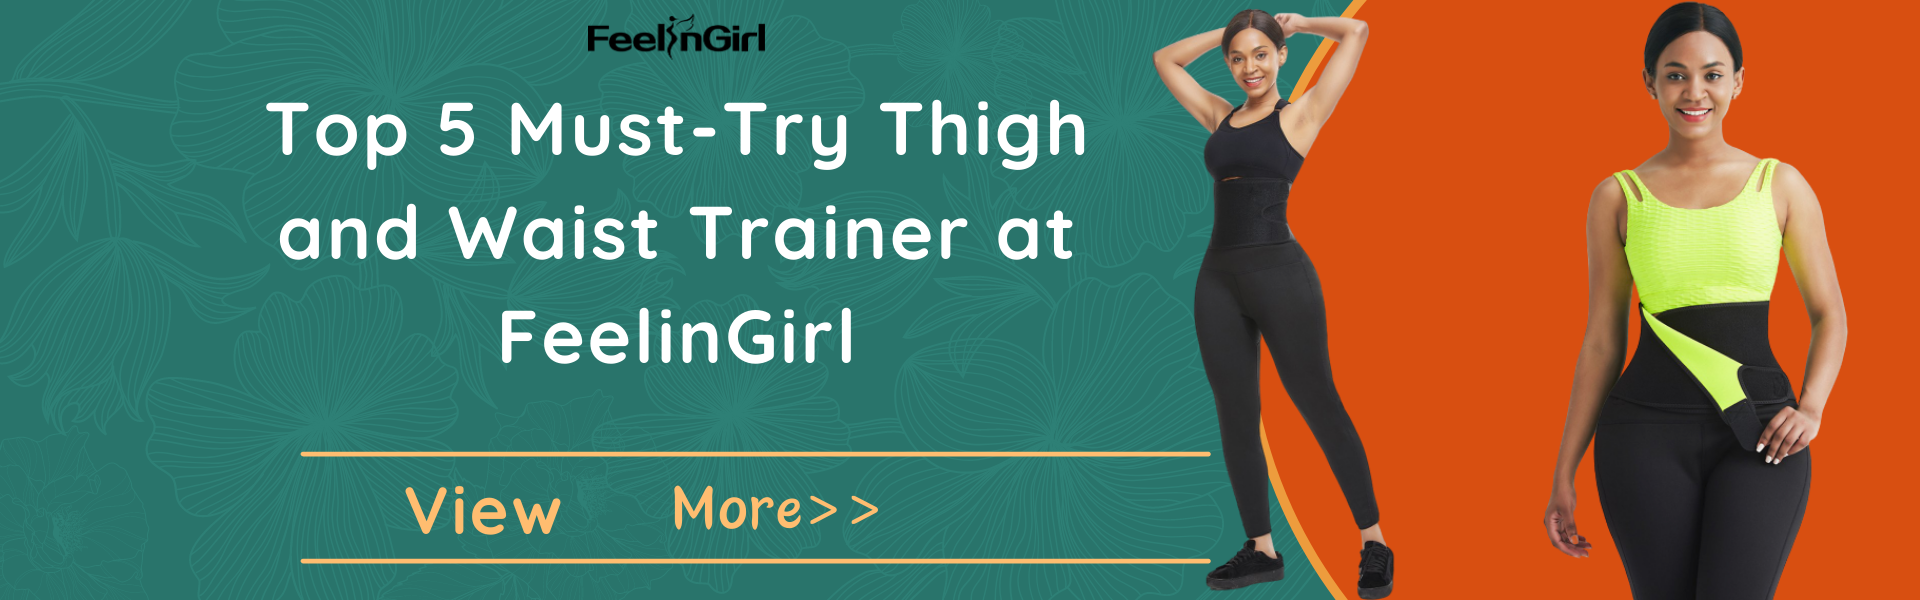 Top 5 Must-Try Thigh and Waist Trainer at FeelinGirl